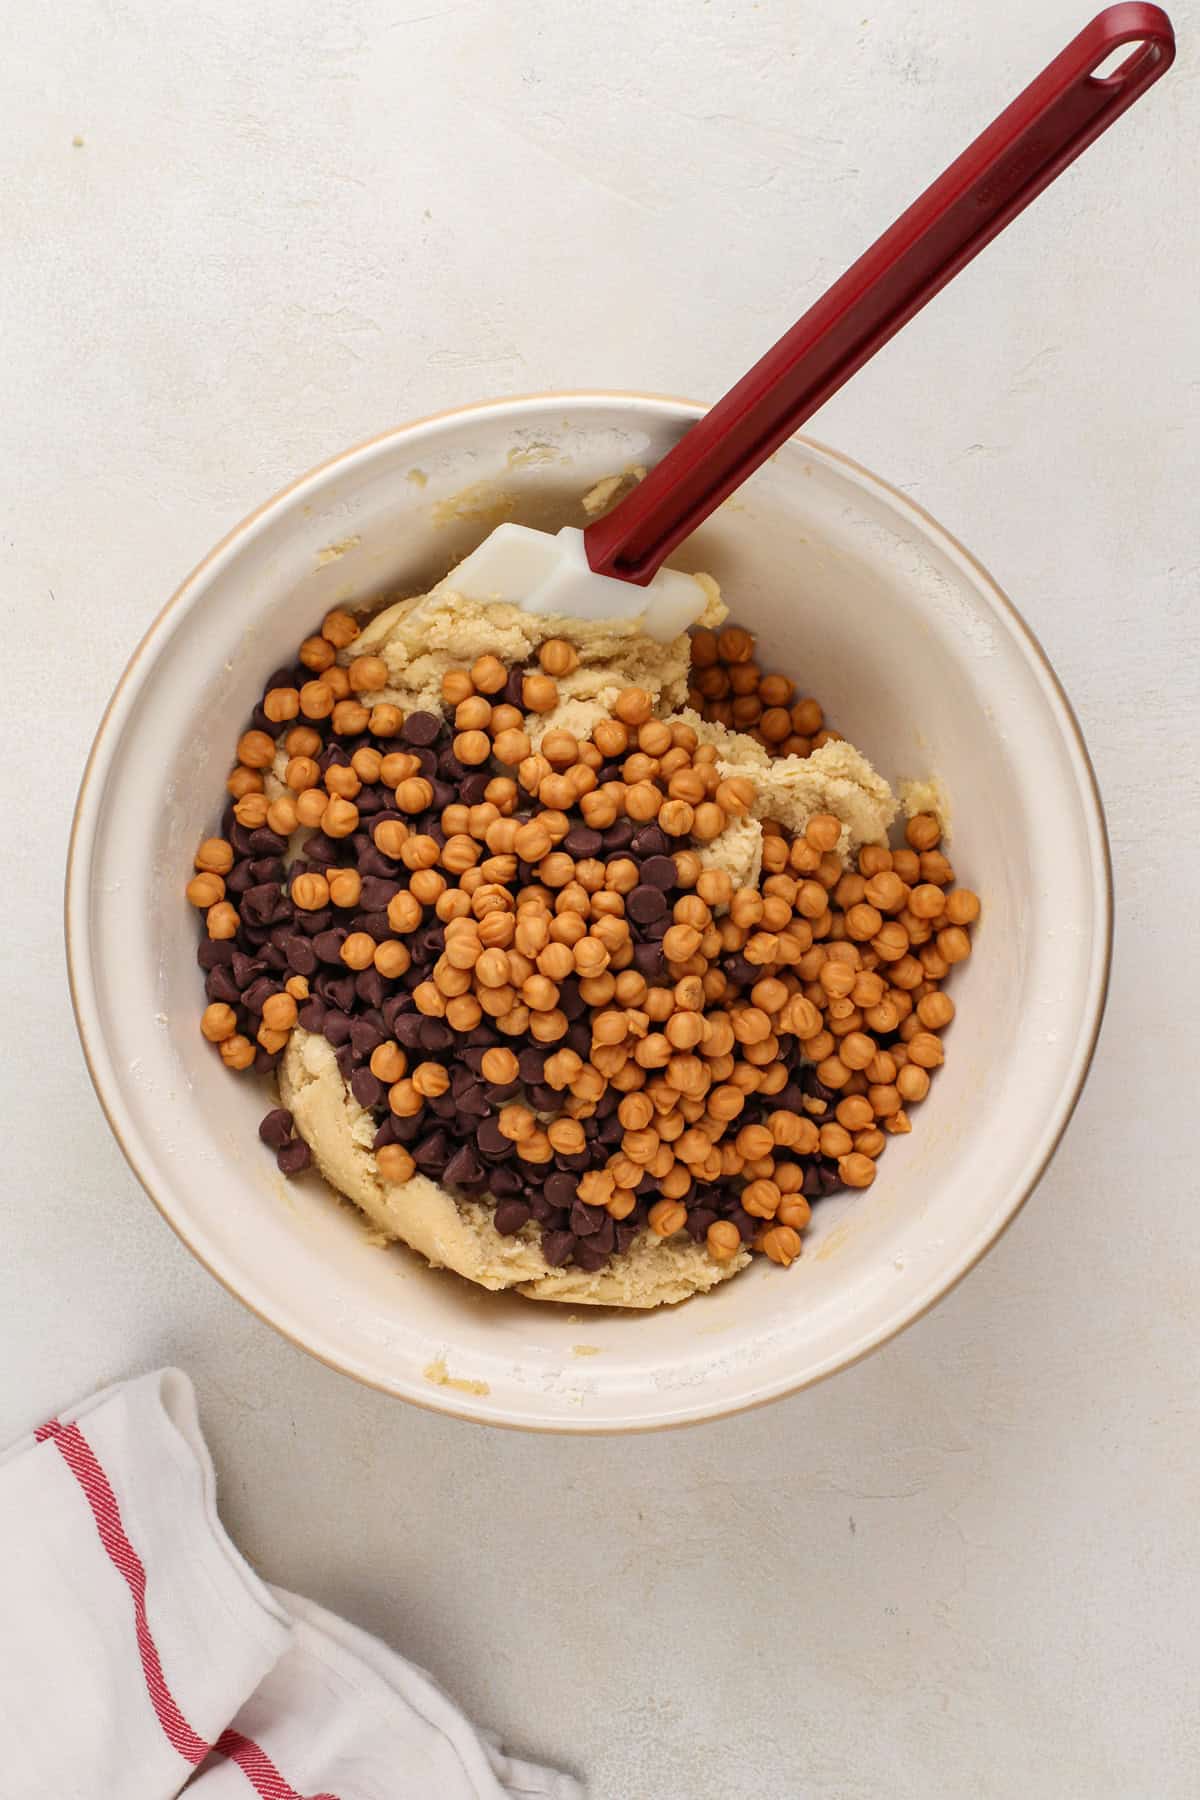 Chocolate chips and caramel bits being added to cookie dough in a mixing bowl.